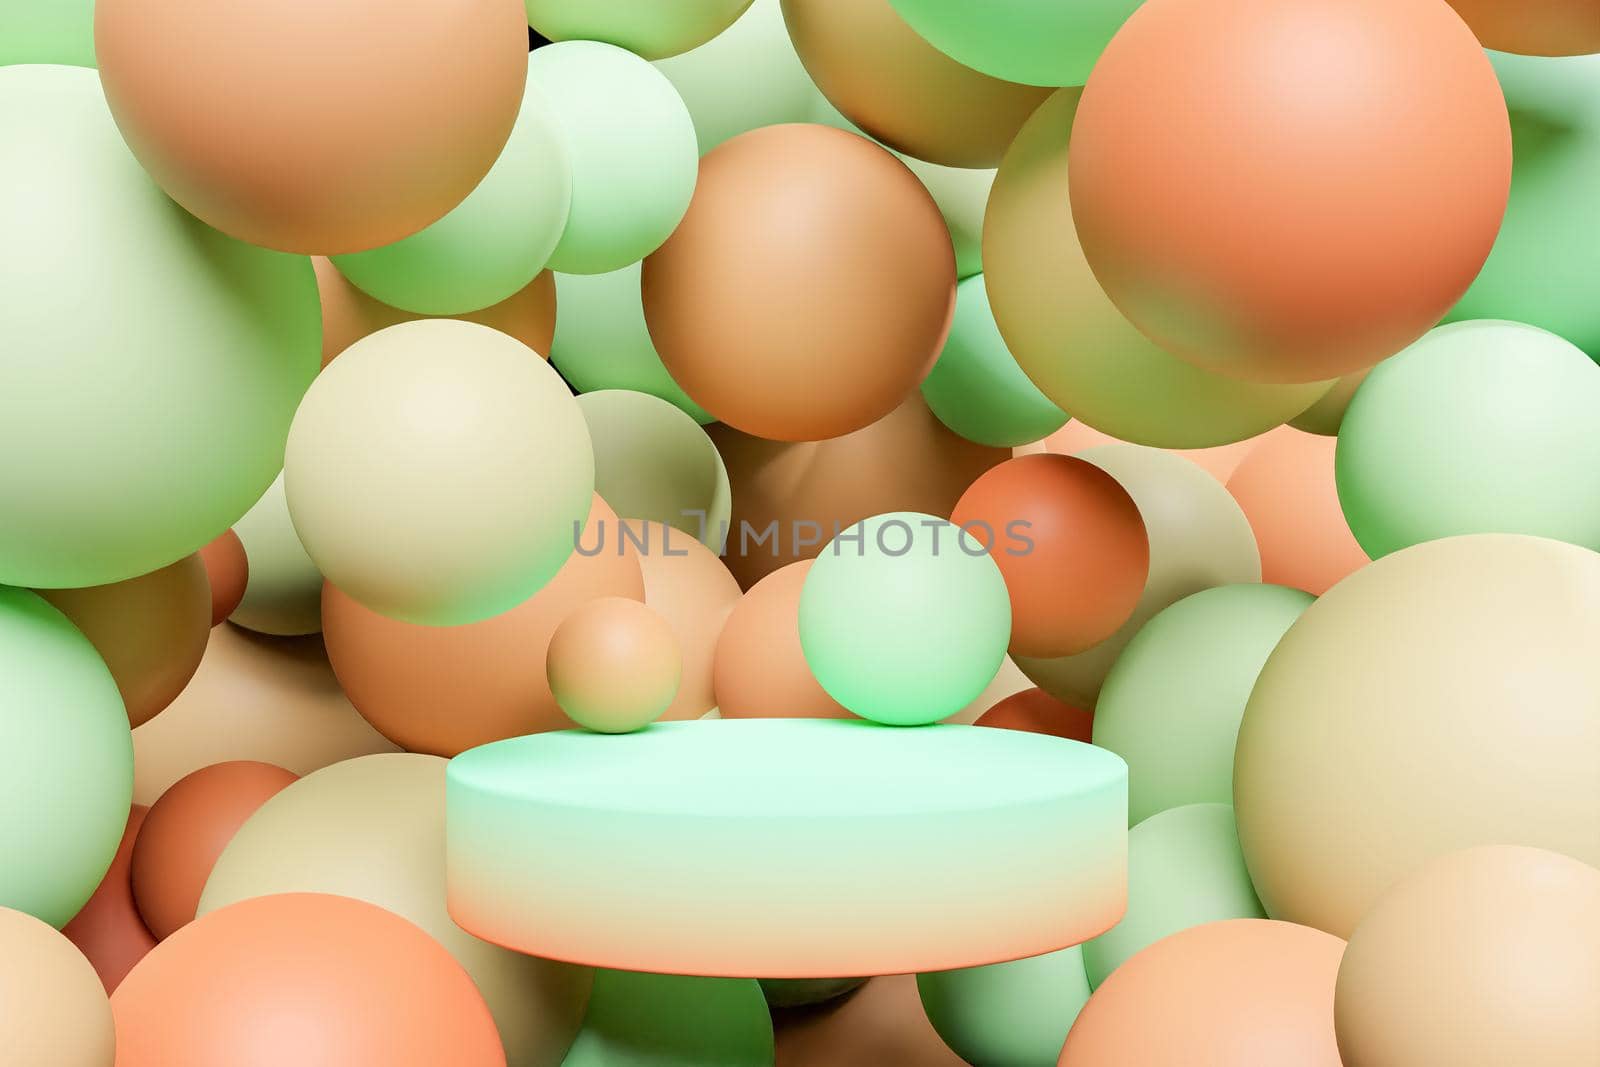 cylinder for product presentation surrounded by spheres of gradient color. abstract scene. 3d render